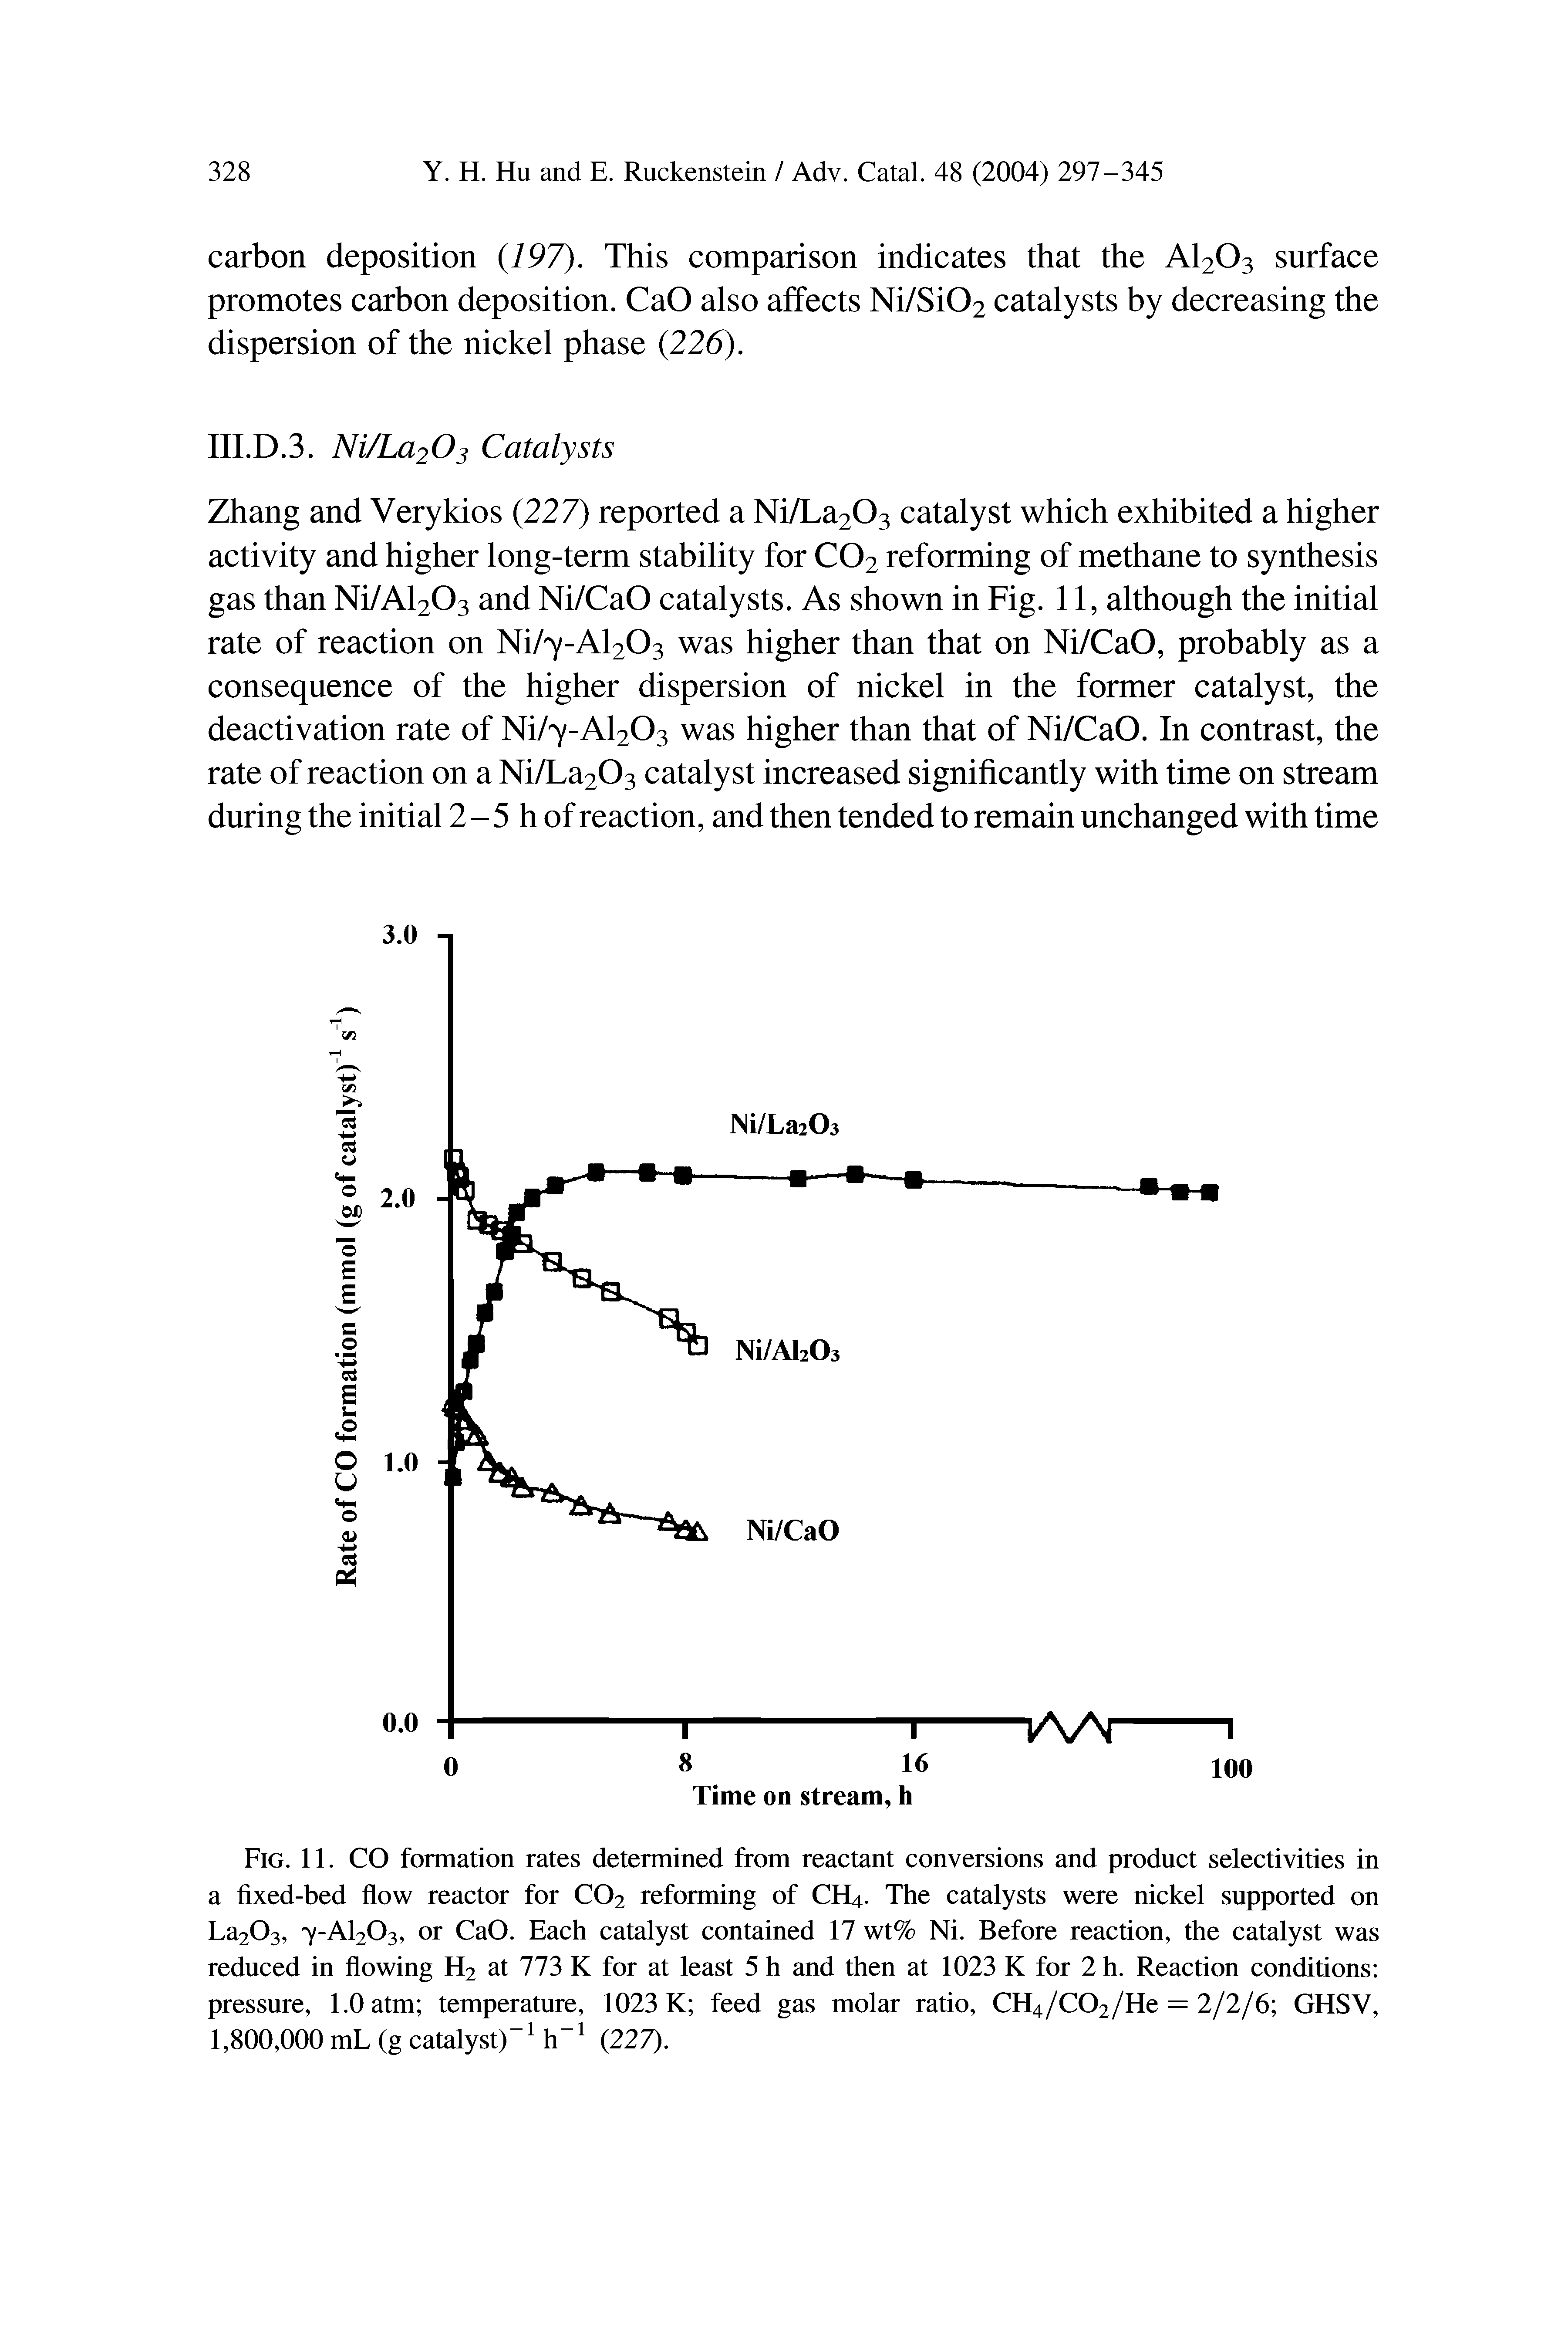 Fig. 11. CO formation rates determined from reactant conversions and product selectivities in a fixed-bed flow reactor for C02 reforming of CH4. The catalysts were nickel supported on La203, y-Al203, or CaO. Each catalyst contained 17 wt% Ni. Before reaction, the catalyst was reduced in flowing H2 at 773 K for at least 5 h and then at 1023 K for 2 h. Reaction conditions pressure, 1.0 atm temperature, 1023 K feed gas molar ratio, CH4/C02/He = 2/2/6 GHSV, 1,800,000 mL (g catalyst)-1 h-1 (227).